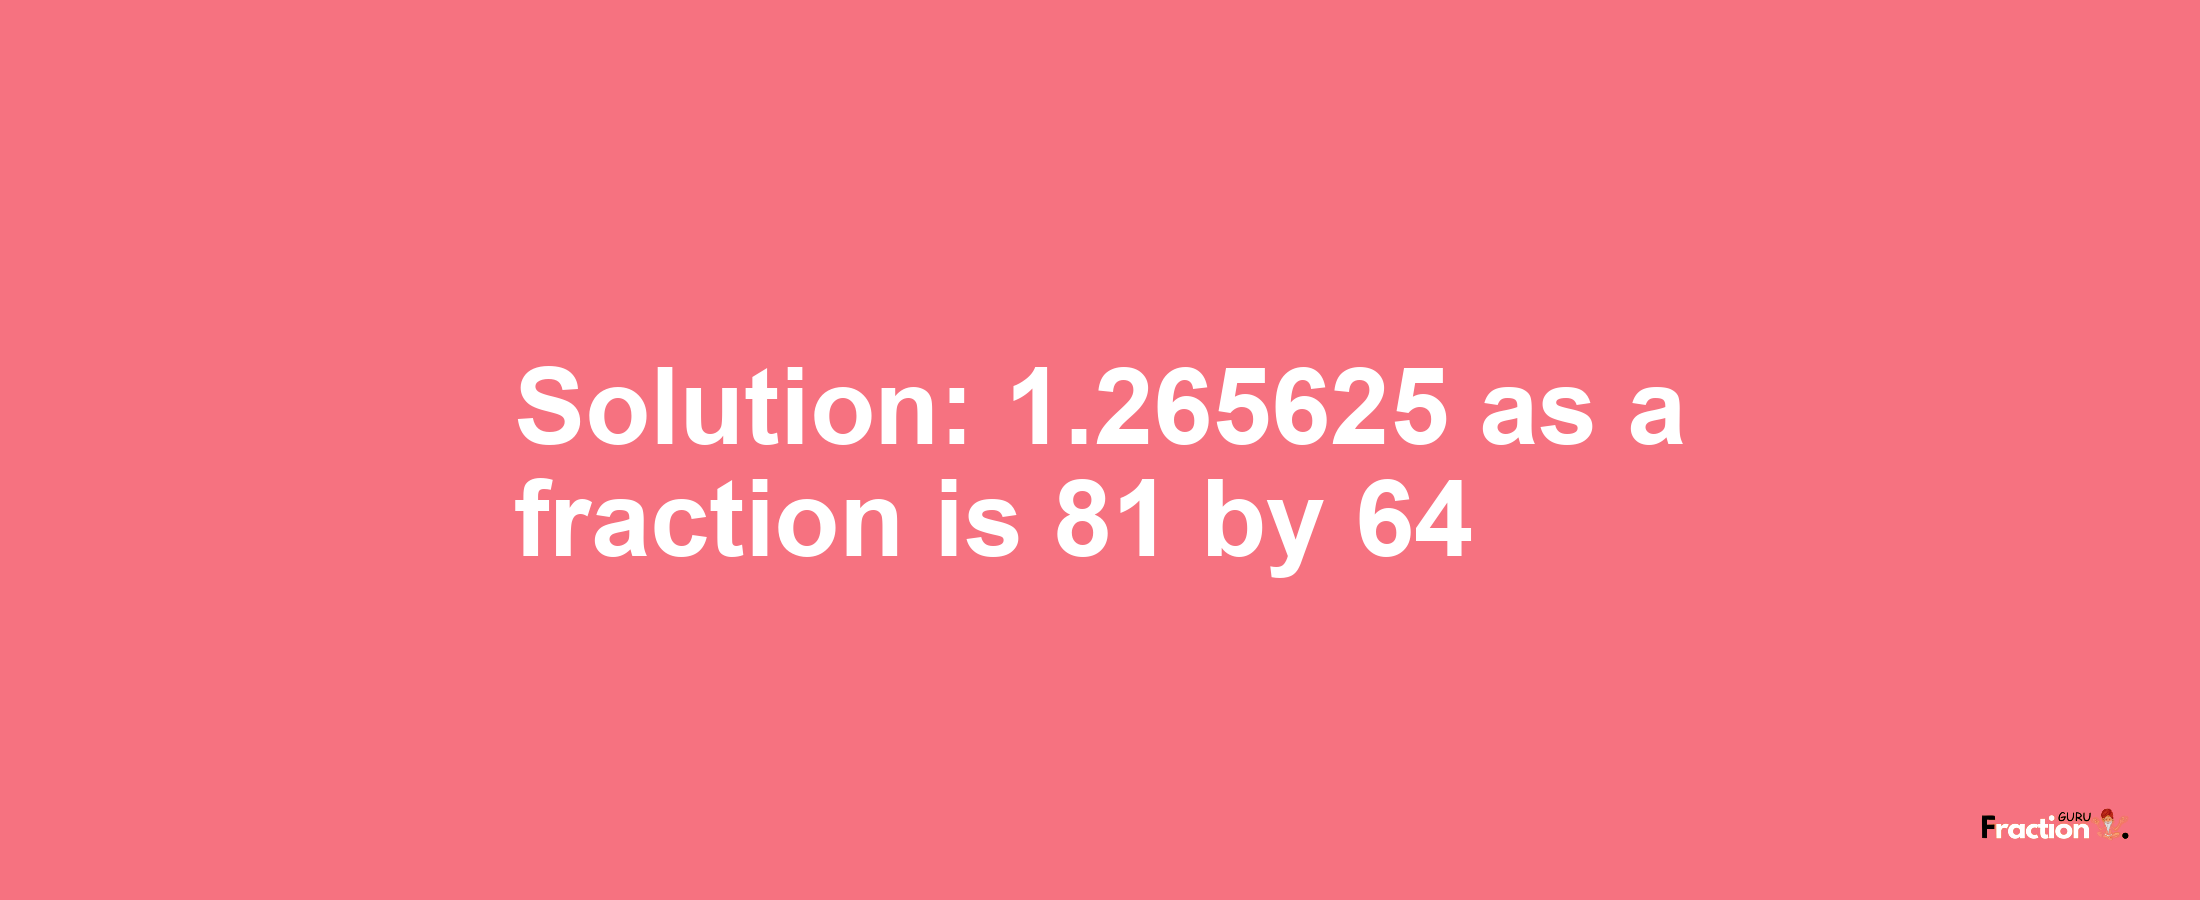 Solution:1.265625 as a fraction is 81/64